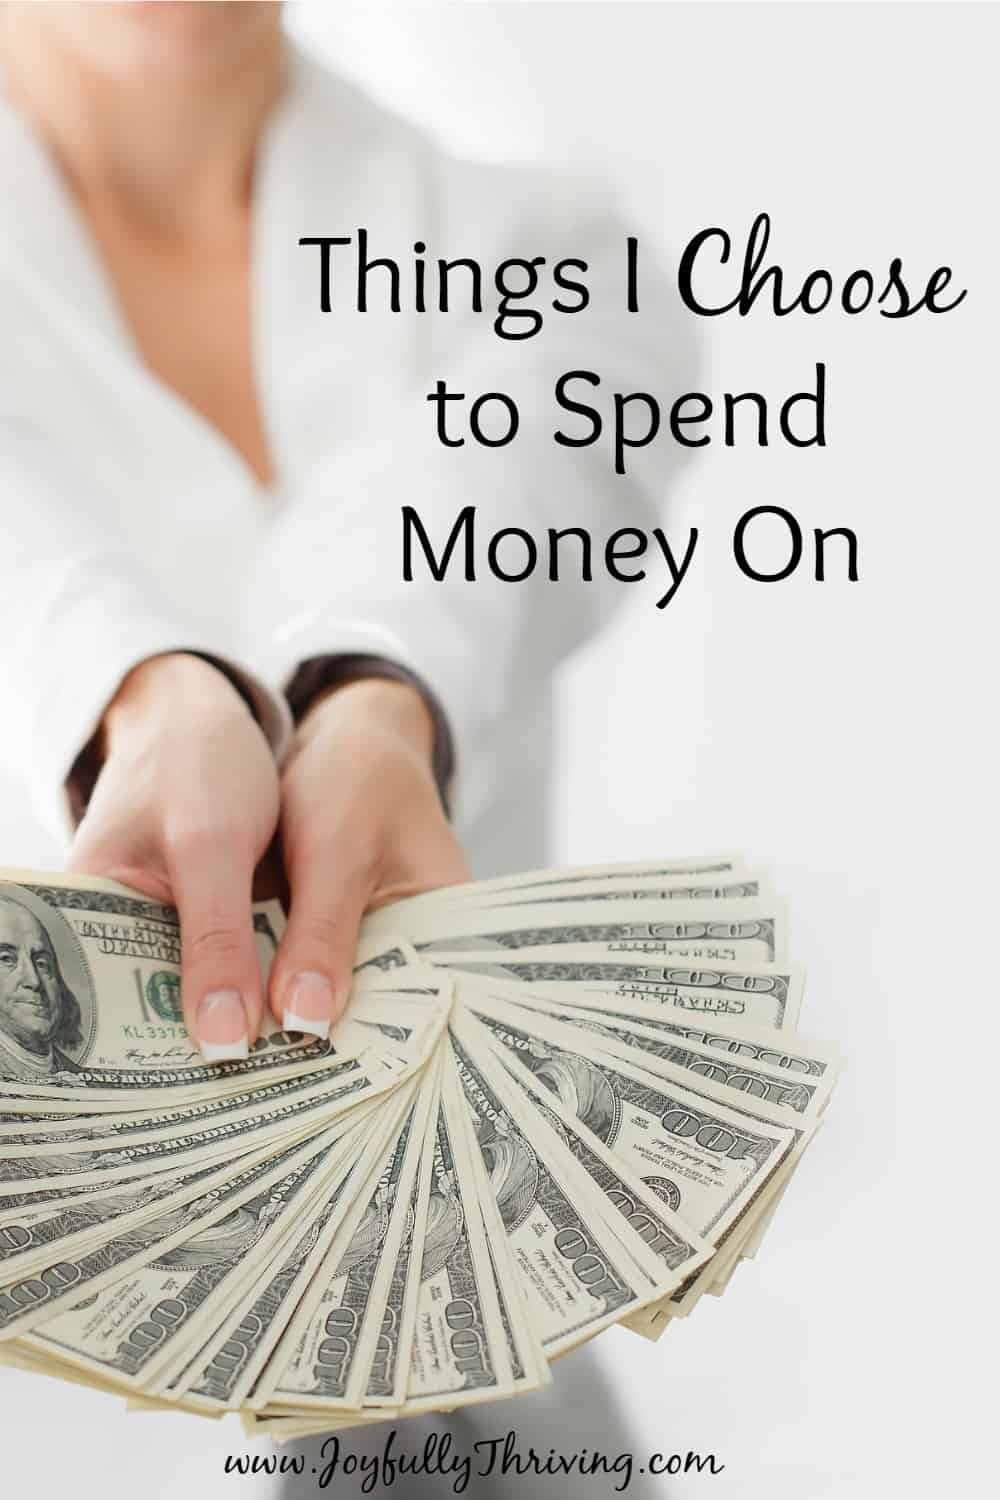 I love seeing what other frugal people choose to spend money on! And I definitely agree with spending money on number 3, too!